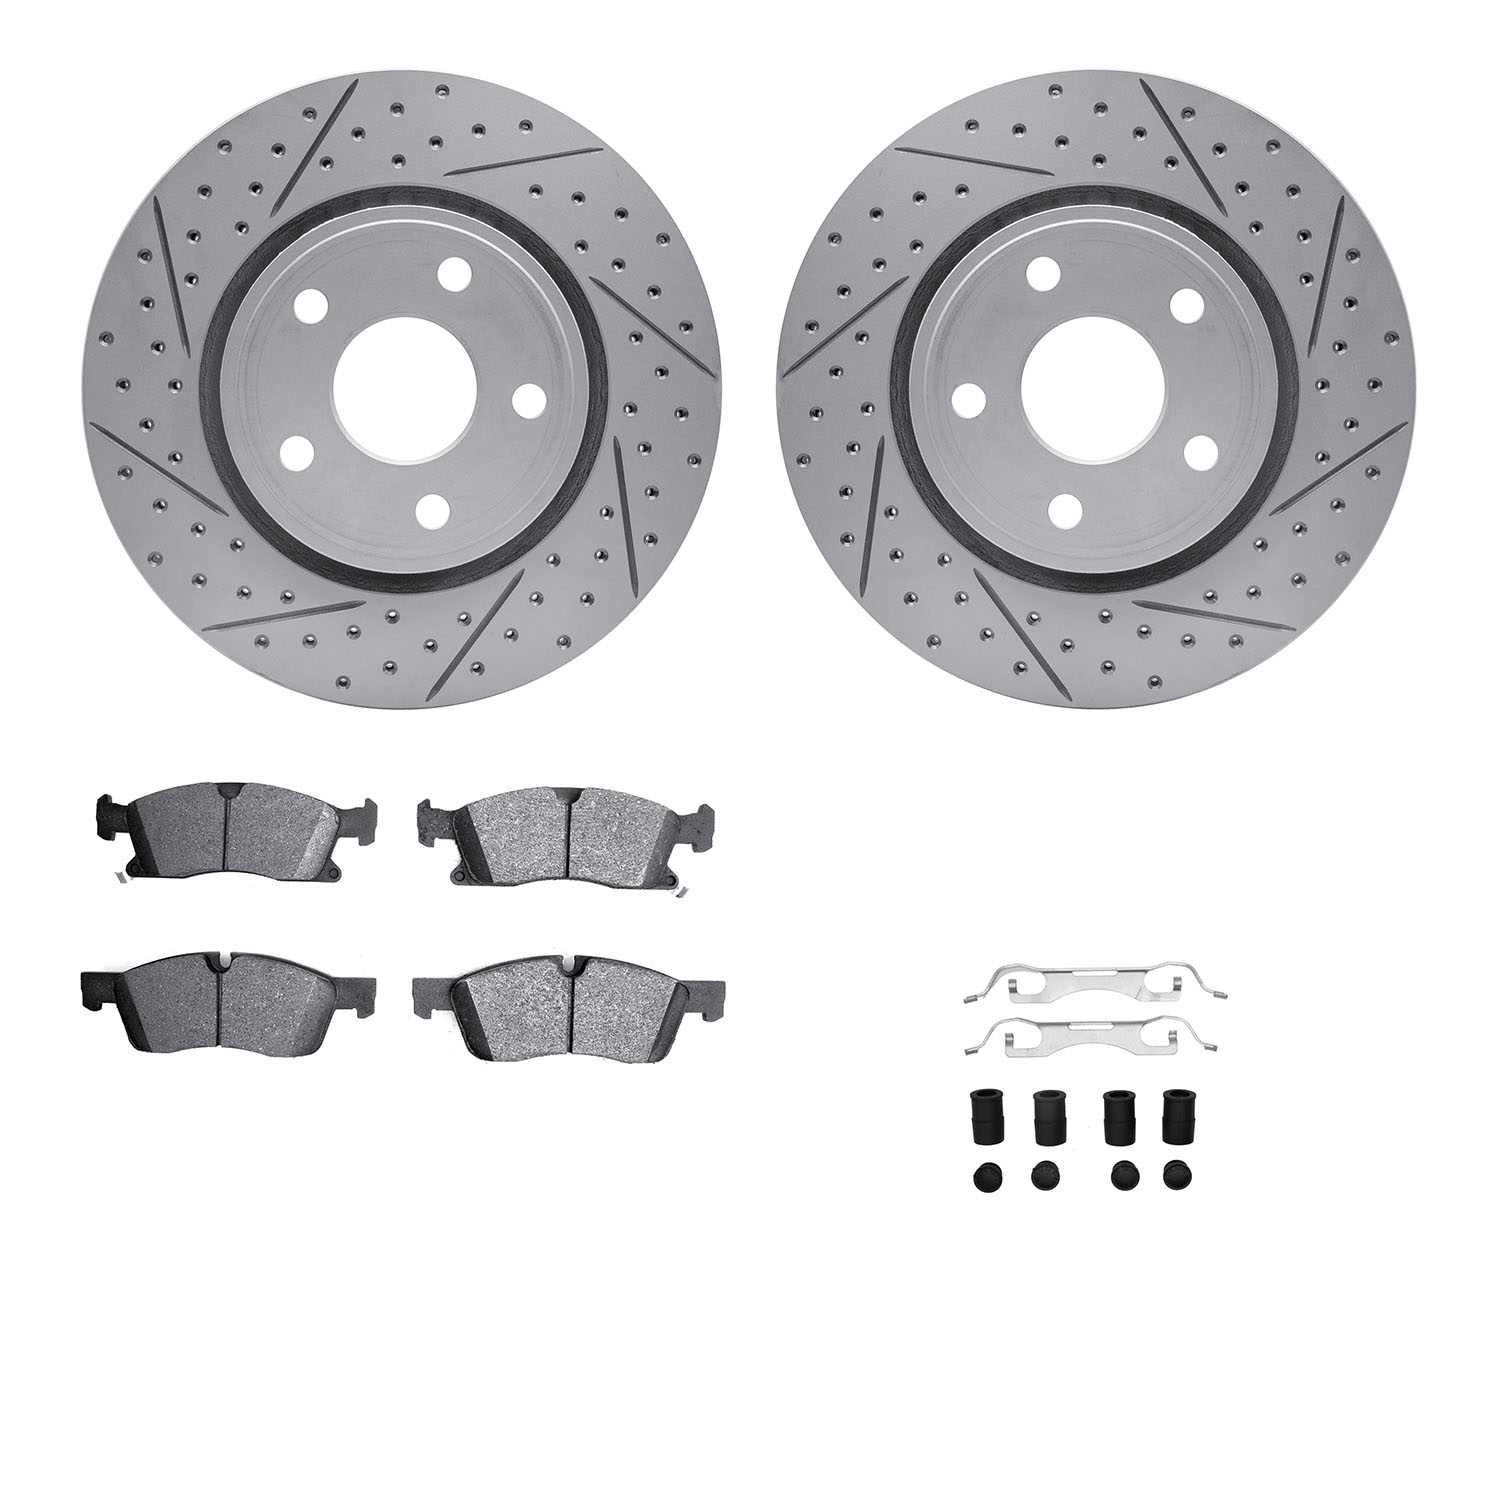 2212-42002 Geoperformance Drilled/Slotted Rotors w/Heavy-Duty Pads Kit & Hardware, Fits Select Mopar, Position: Front